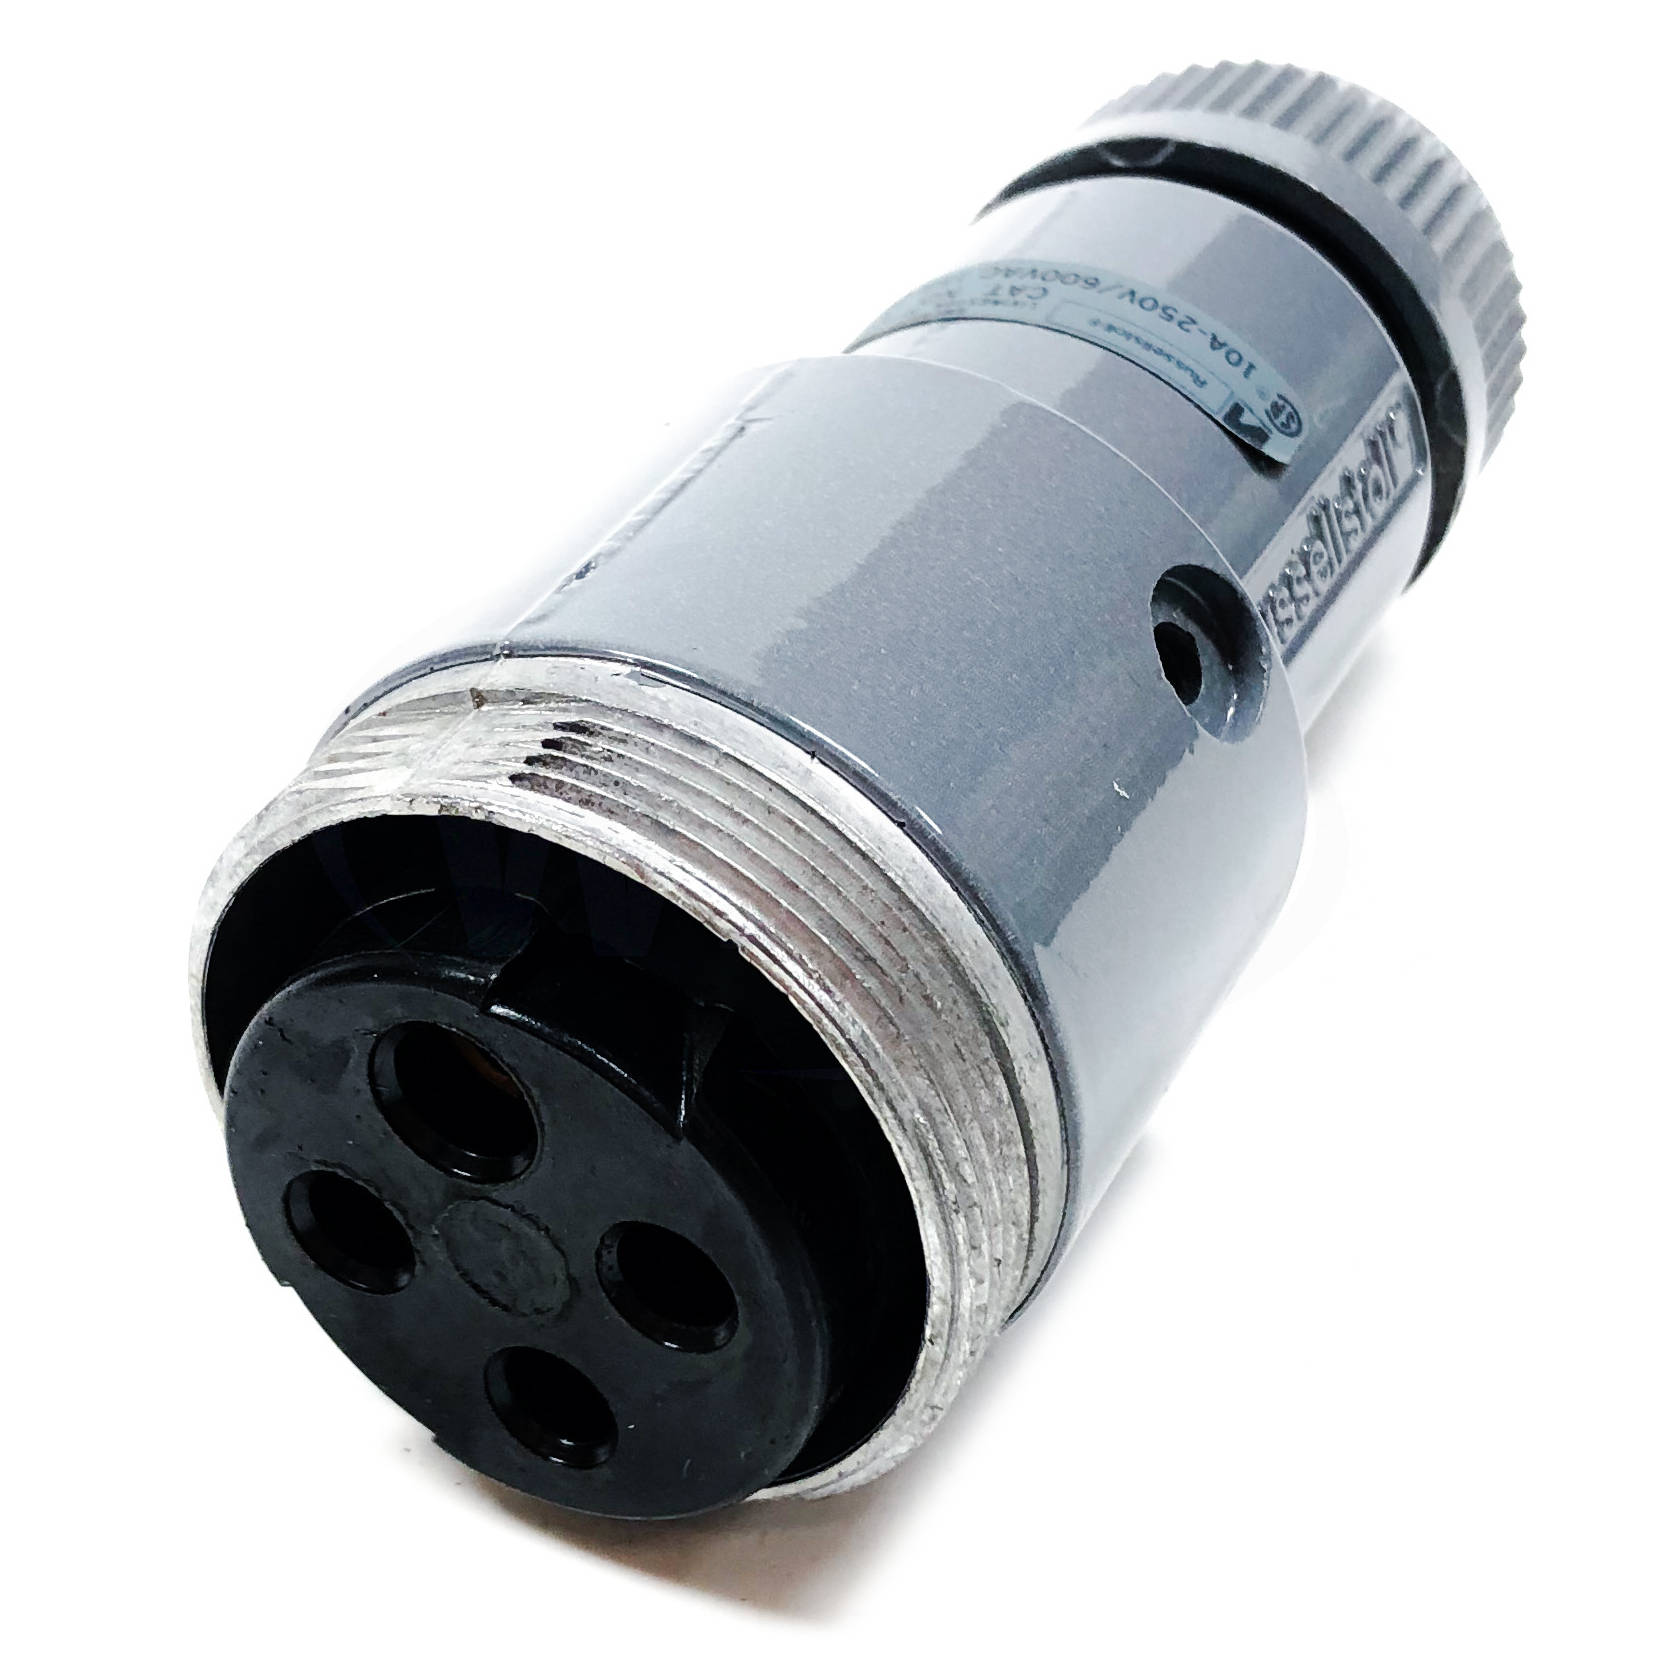 3914 MRS Power Systems Connector, 3-Wire, 4-Pole 3